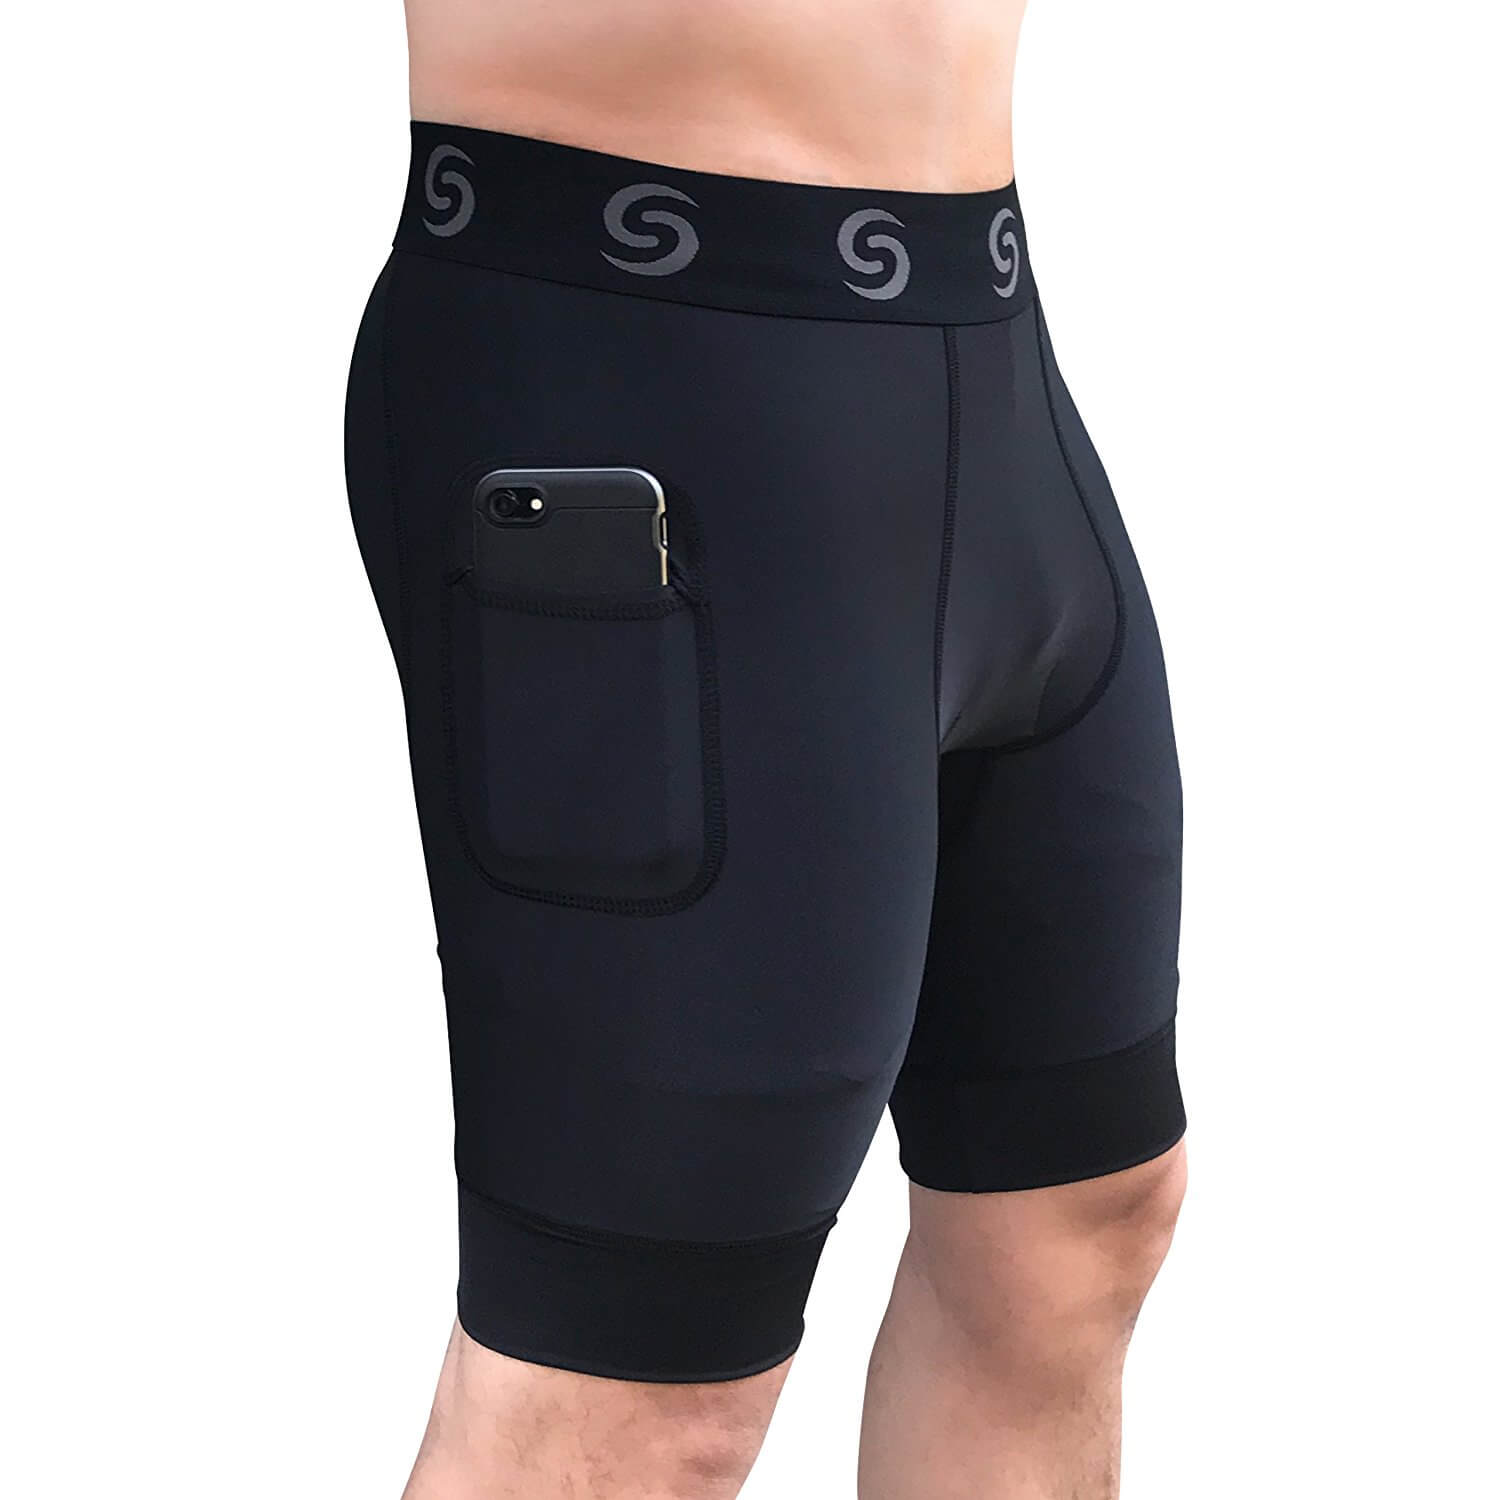 Download Go Sport-it: MEN'S COMPRESSION SHORTS with Side Pockets